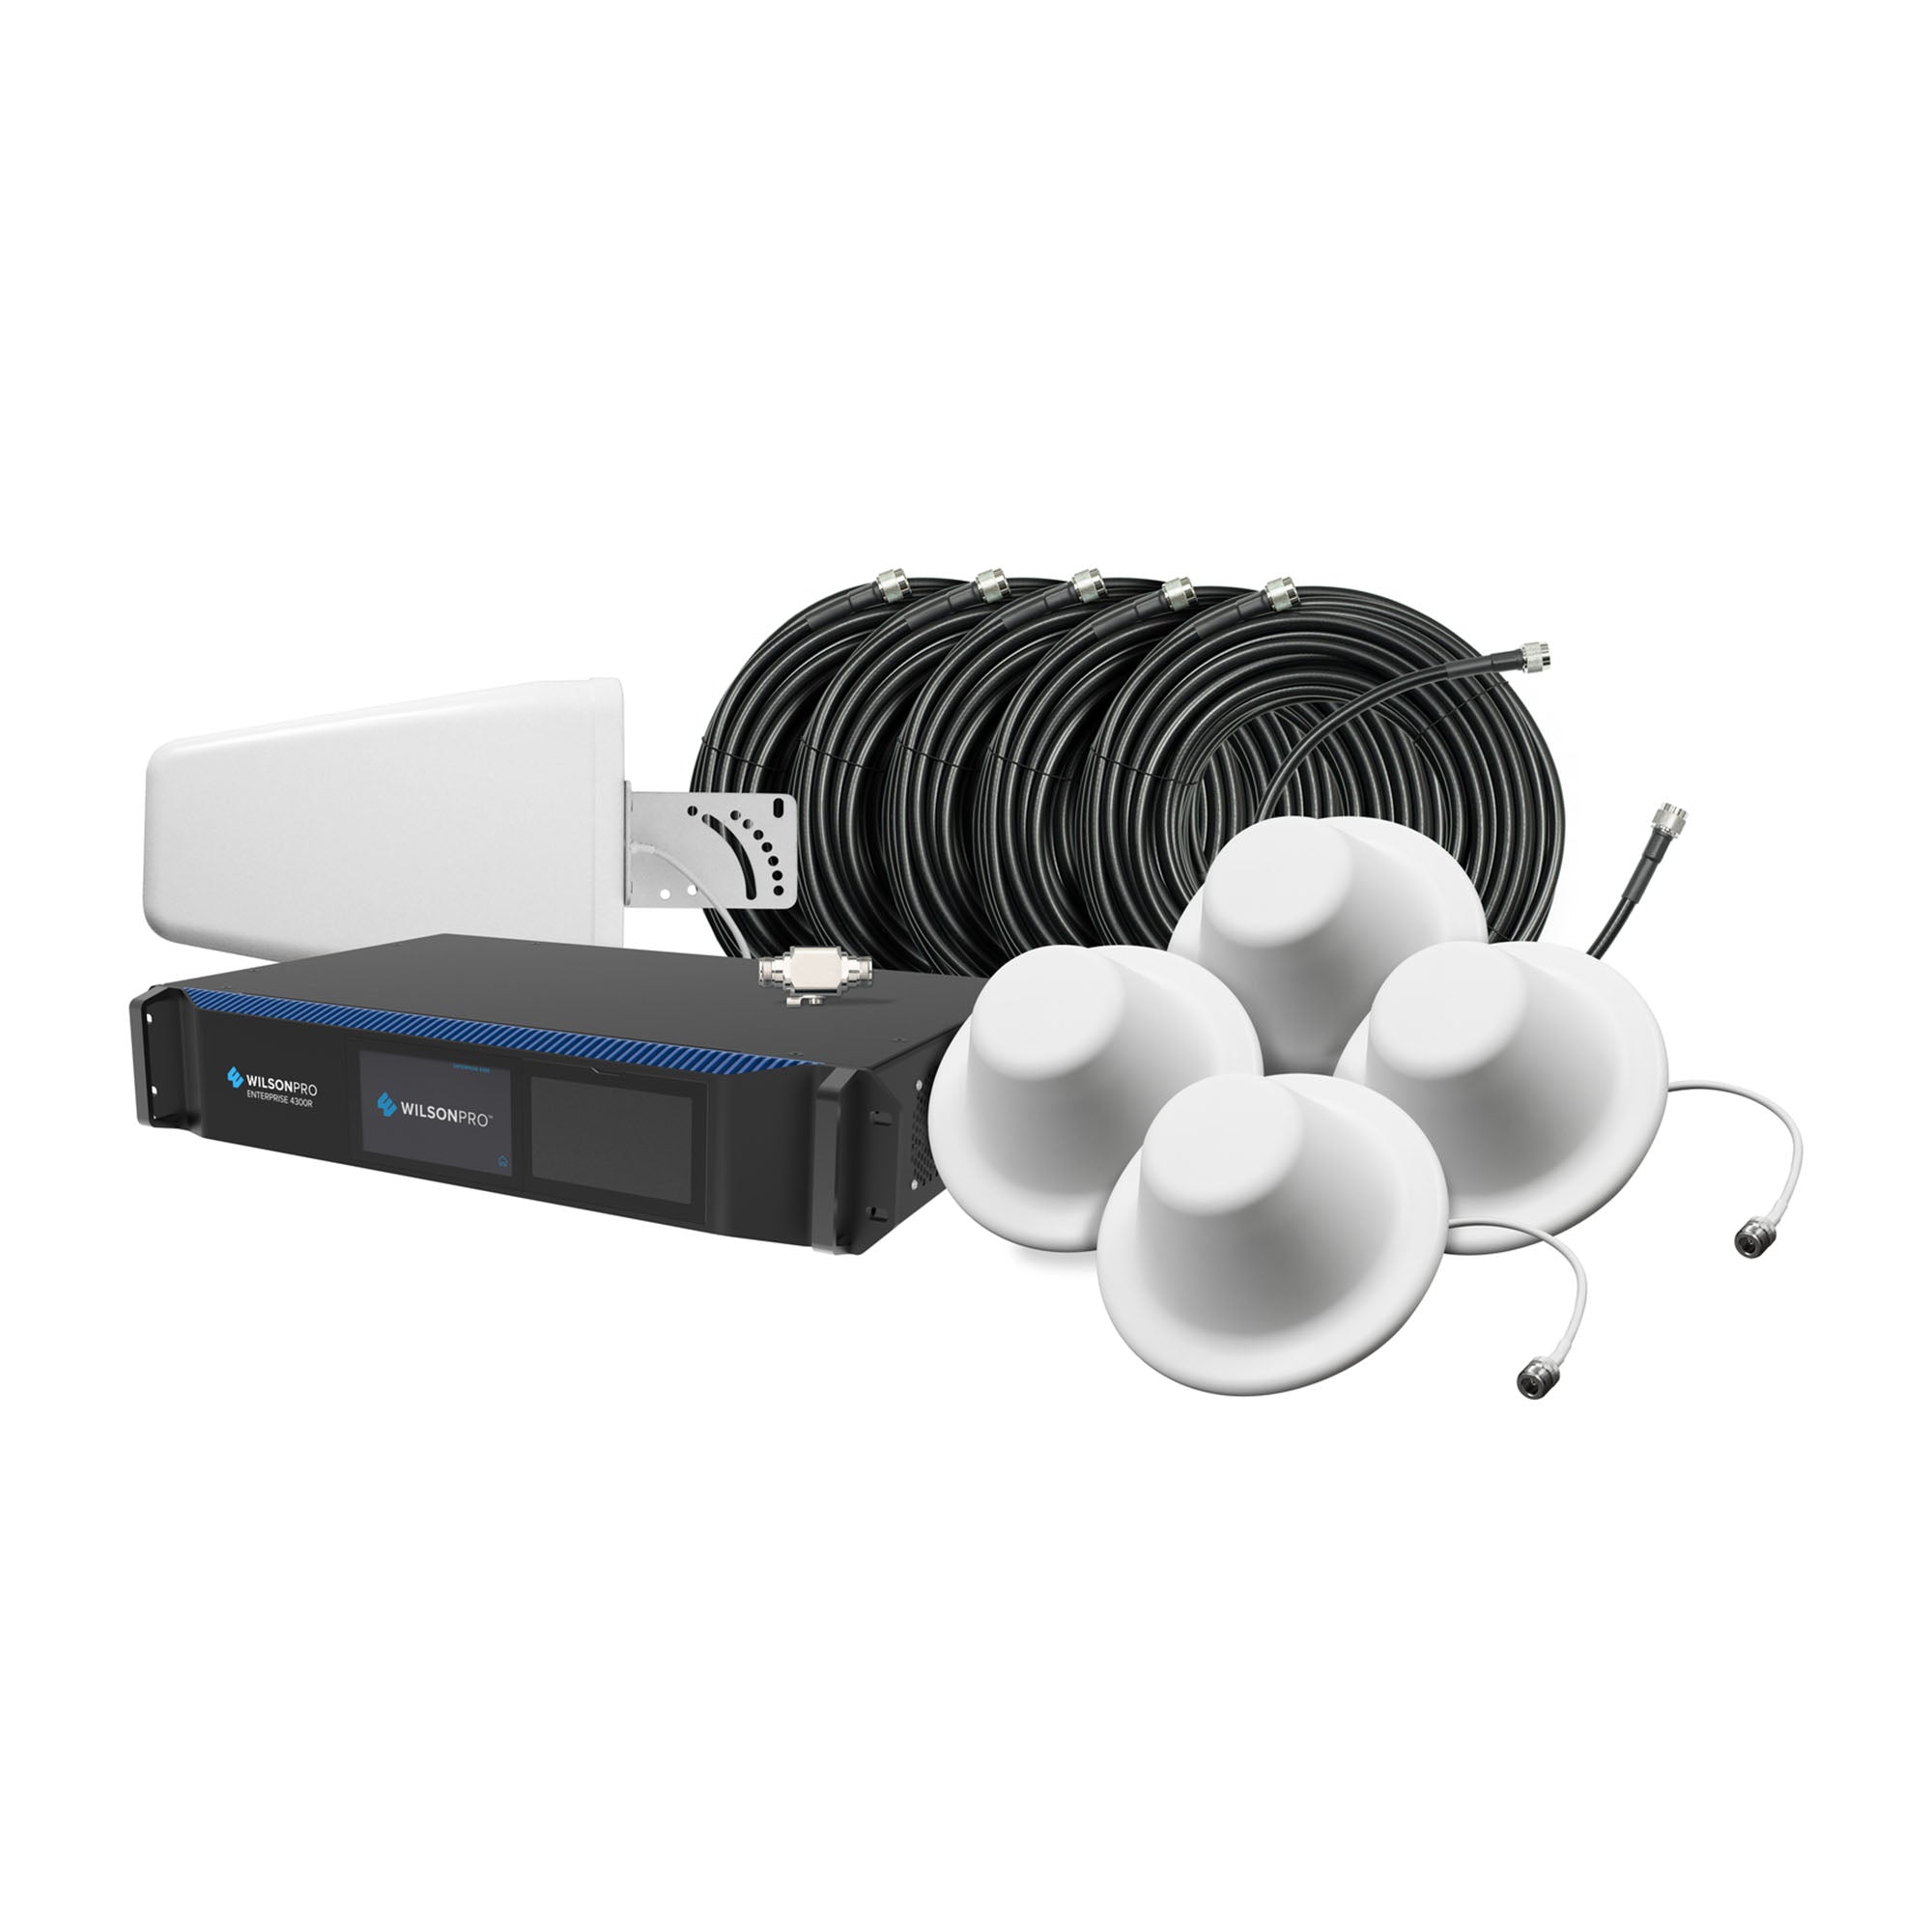 WilsonPro Enterprise 4300R Commercial In-Building Signal Booster Kit - 50 Ohm - Rack Mount Solution